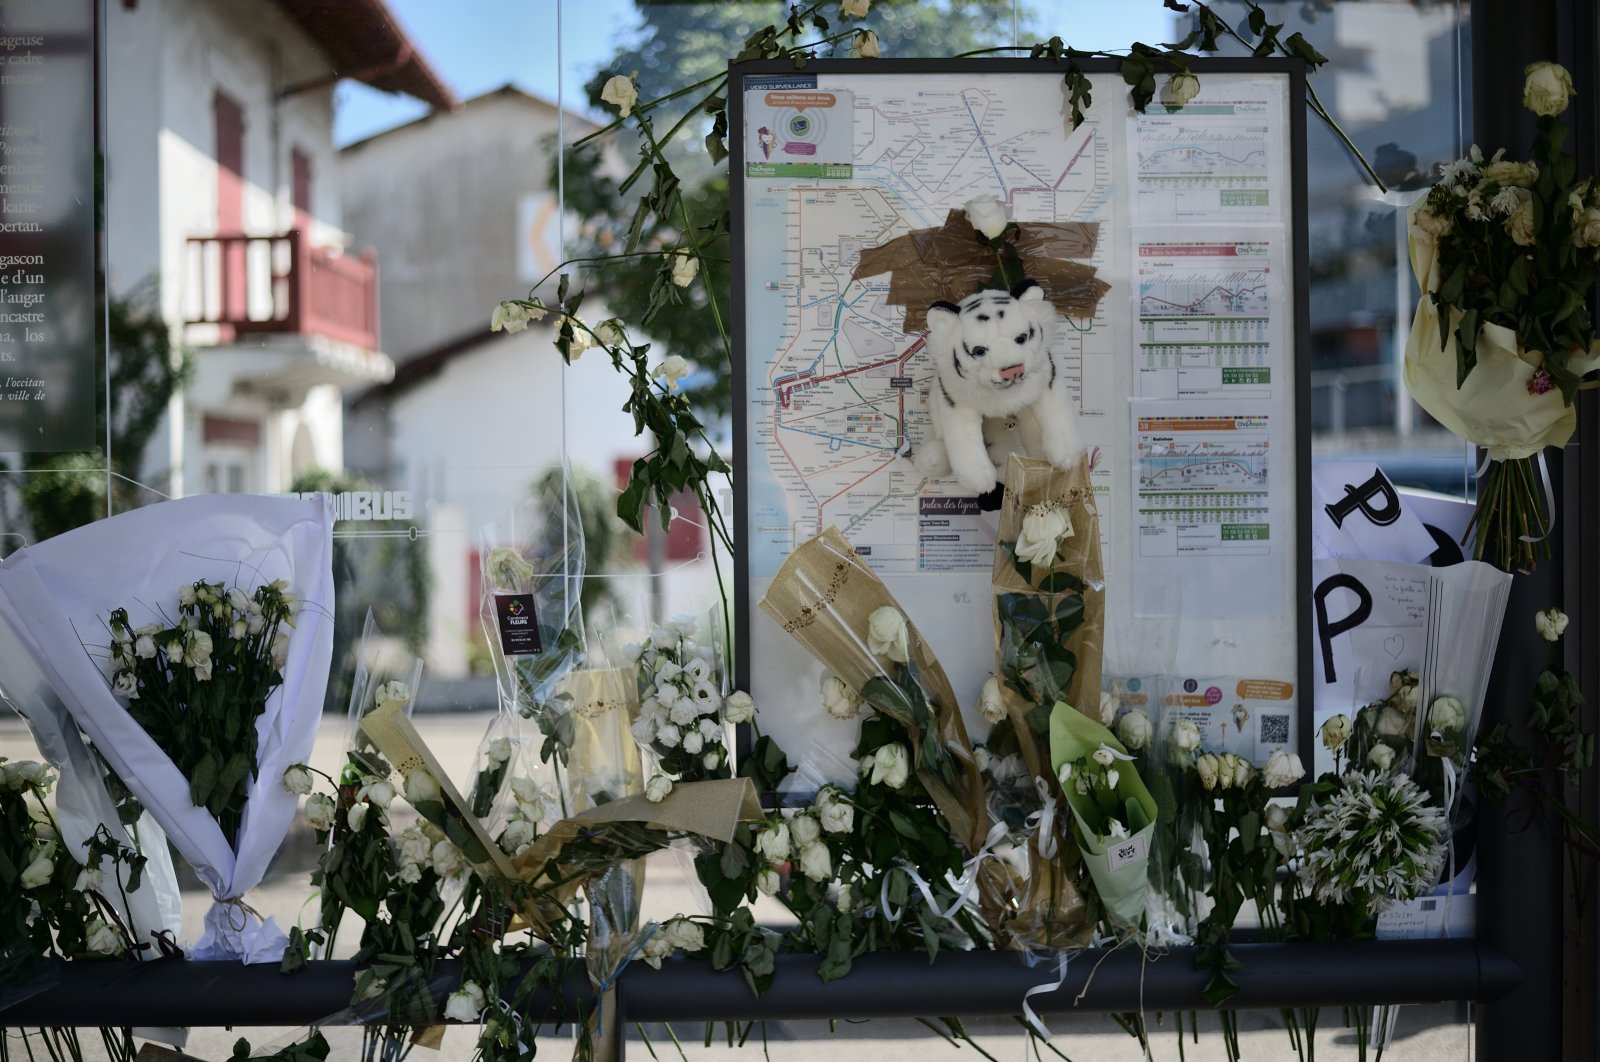 The Balishon bus stop the day after the death of Philippe Monguillot, the bus driver assaulted on Sunday 5 of July in Bayonne. Bayonne - July 11, 2020. (Reuters Photo)